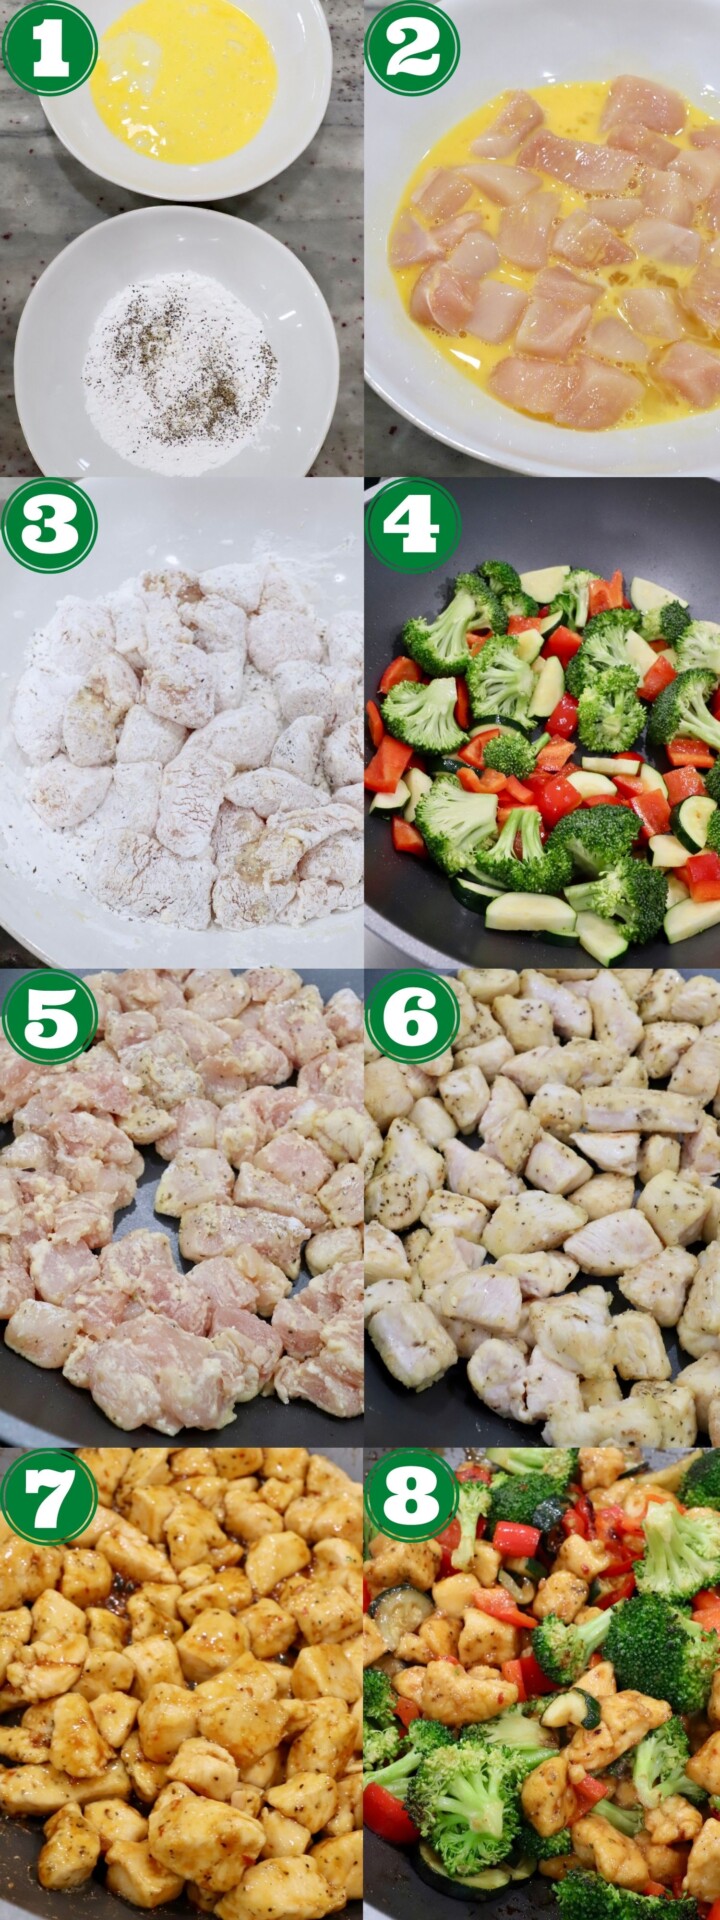 collage of images showing how to make teriyaki chicken